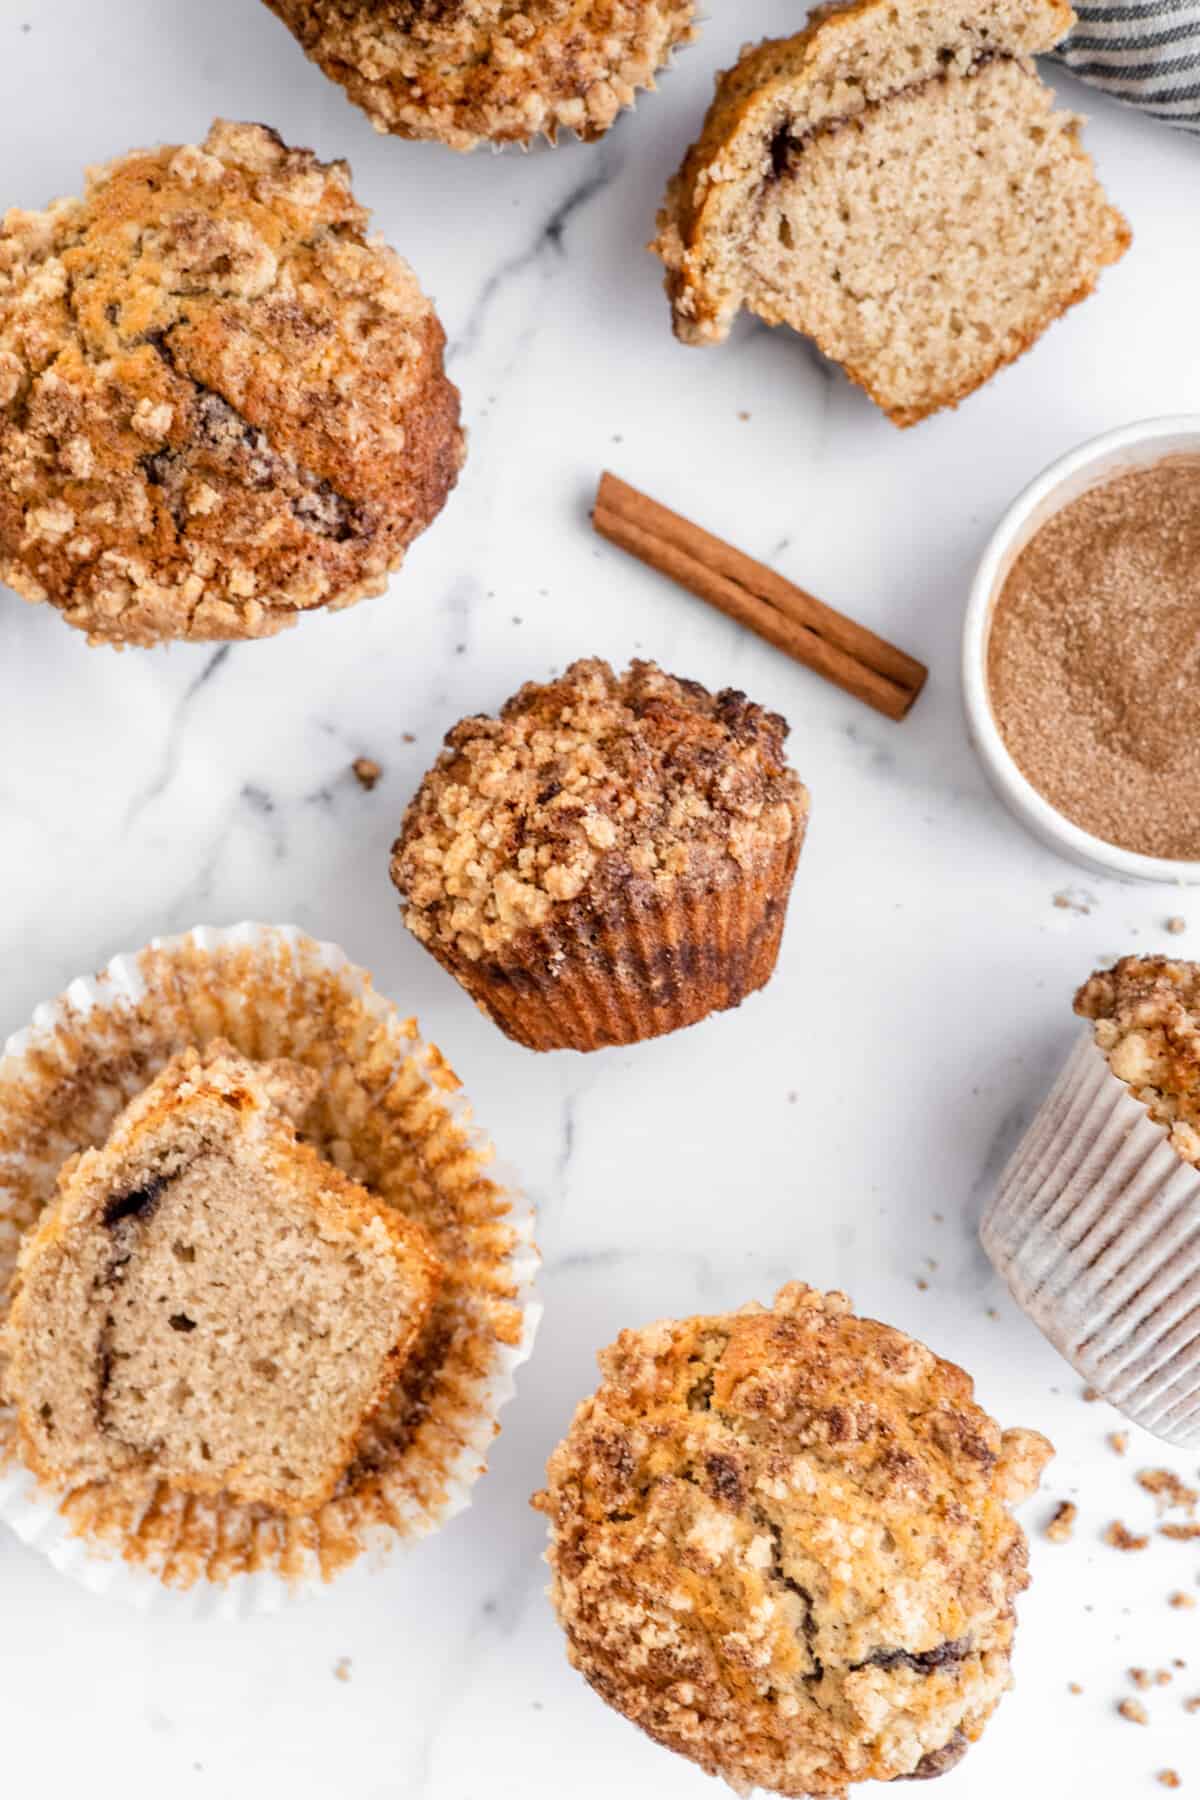 Cinnamon Streusel Muffins on white background